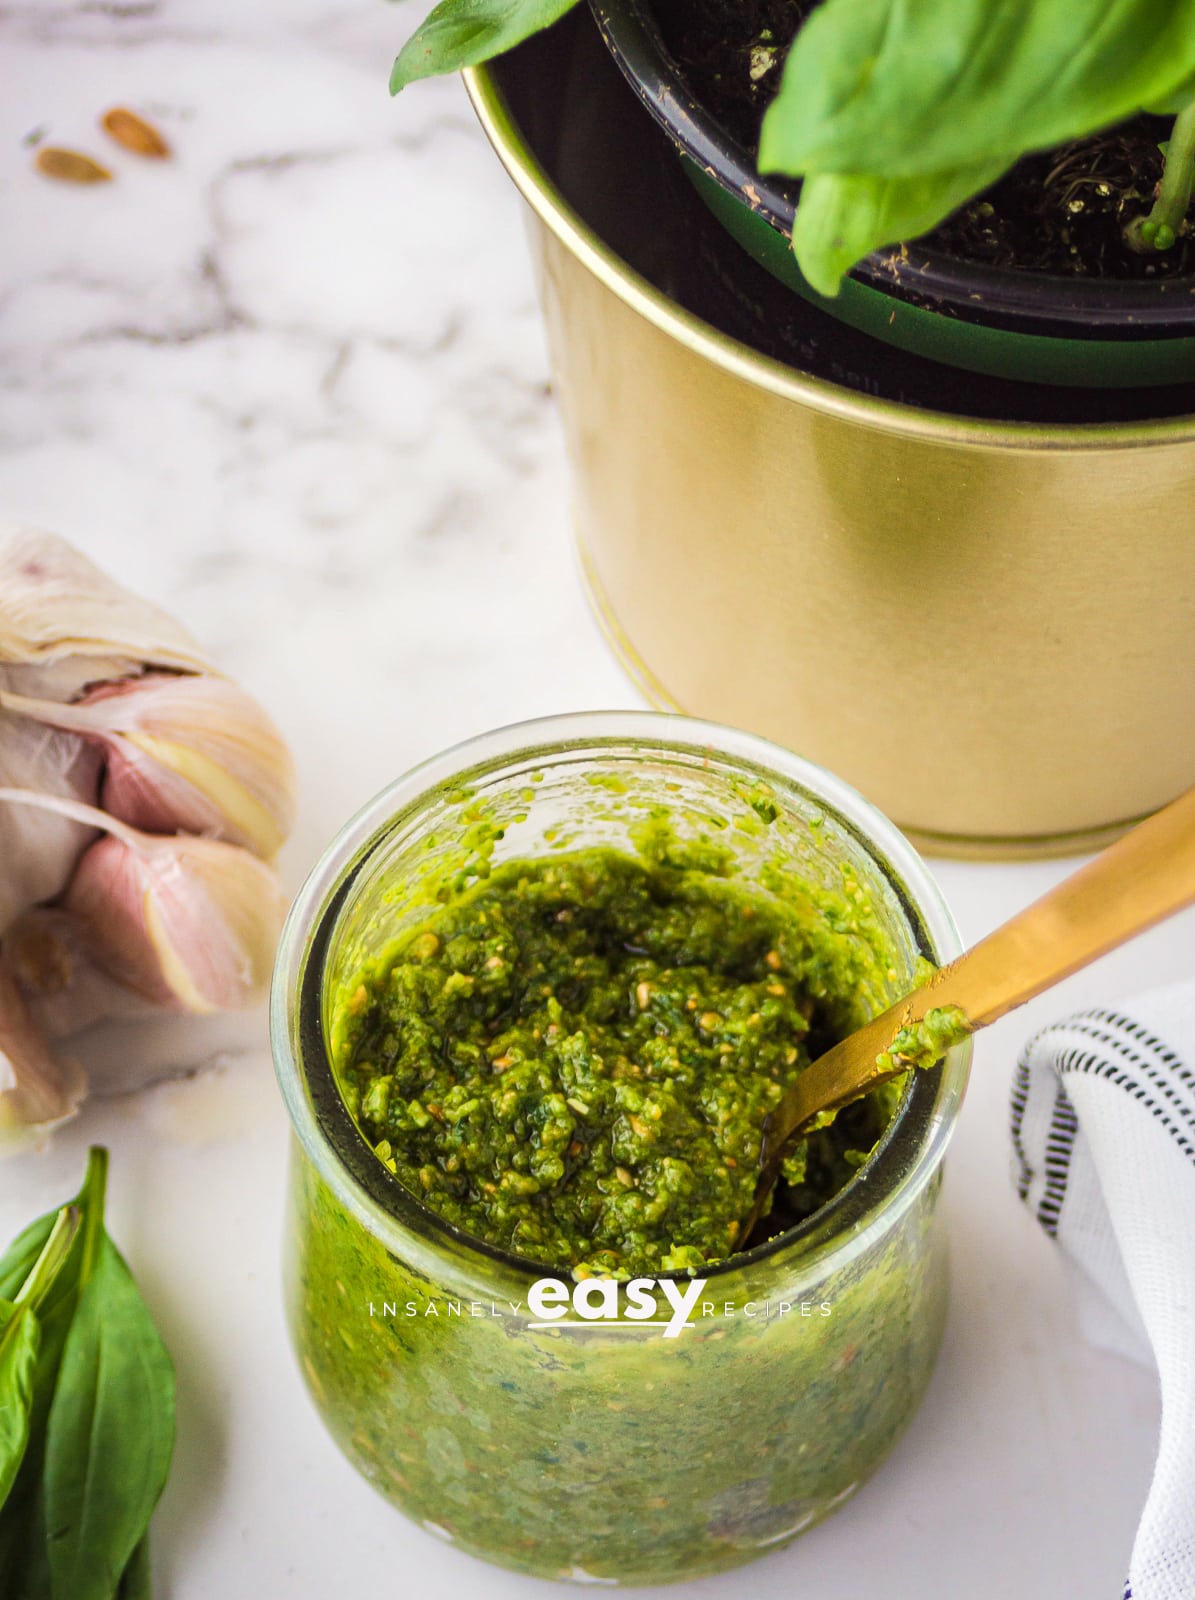 photo of nut free pesto in a small glass jar with a gold spoon dipped inside. the jar is surrounded by basil, garlic cloves, a white kitchen towel, and a gold bowl